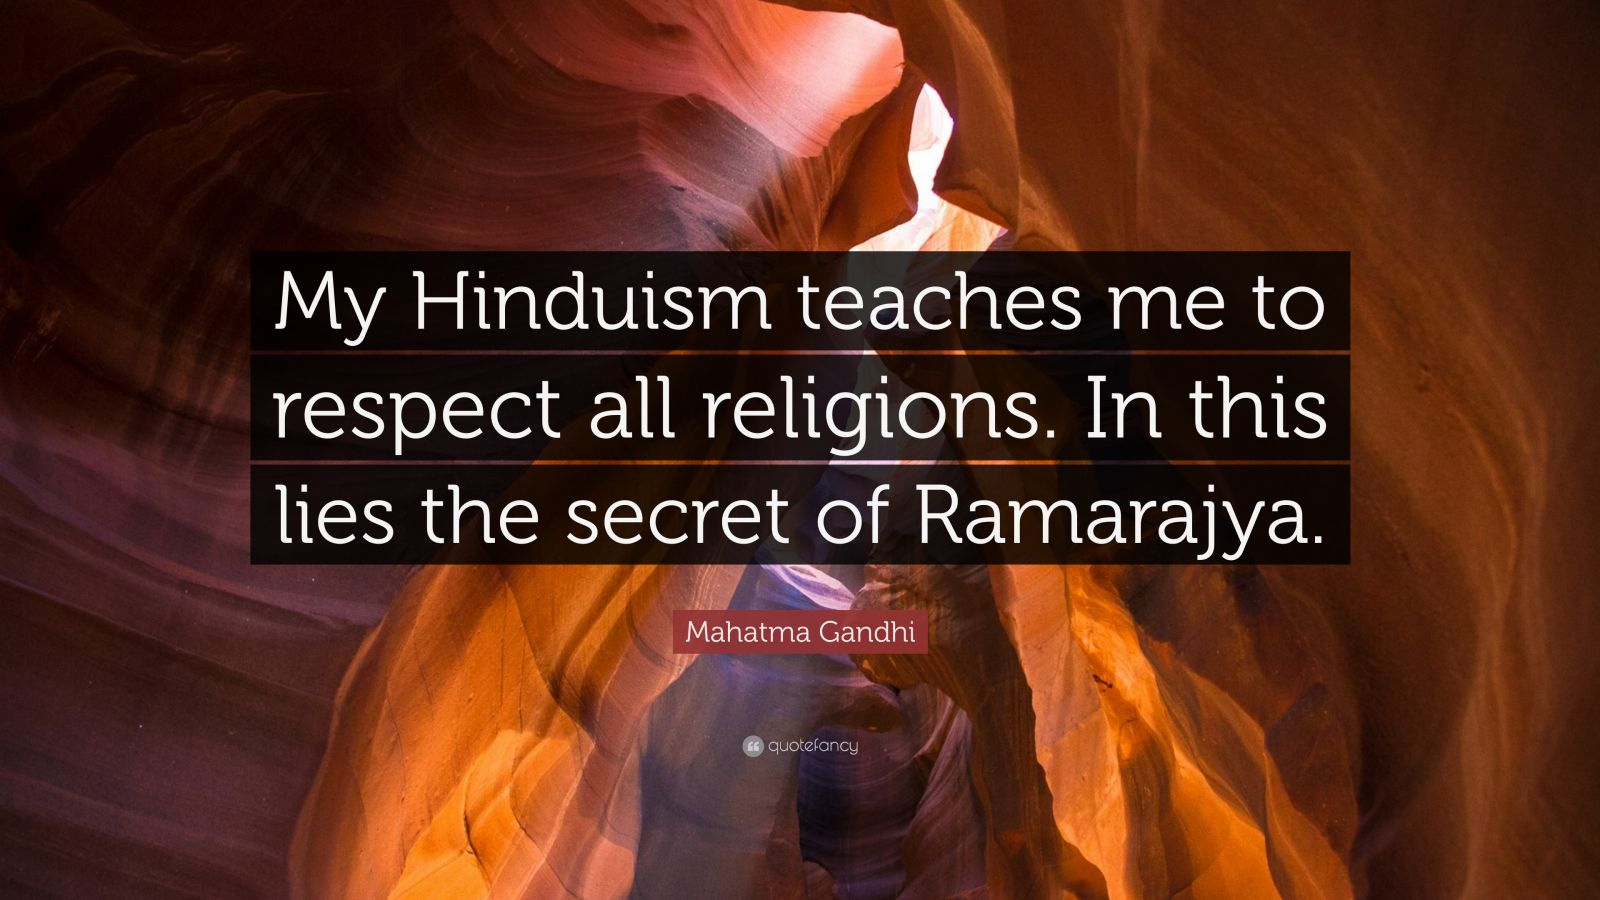 Mahatma Gandhi Quote: “My Hinduism teaches me to respect all religions ...